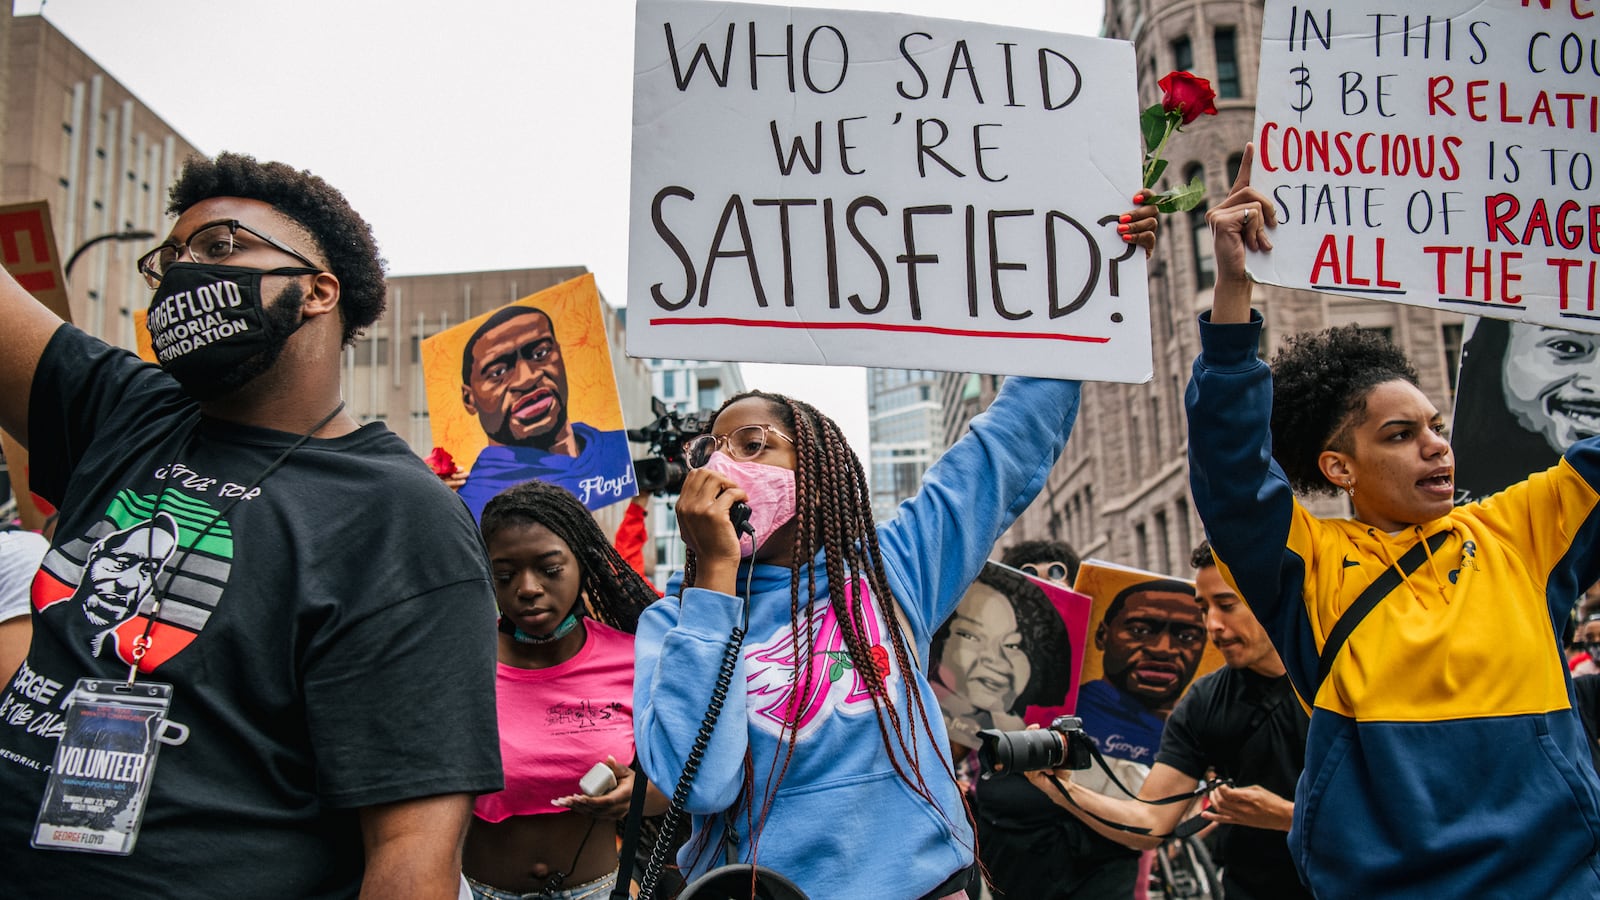 Demonstrators march in memory of George Floyd. In the center, a woman wearing a light blue hoodie and pink pants holds a sign that reads “Who said we’re satisfied?” and speaks through a bull-horn microphone.